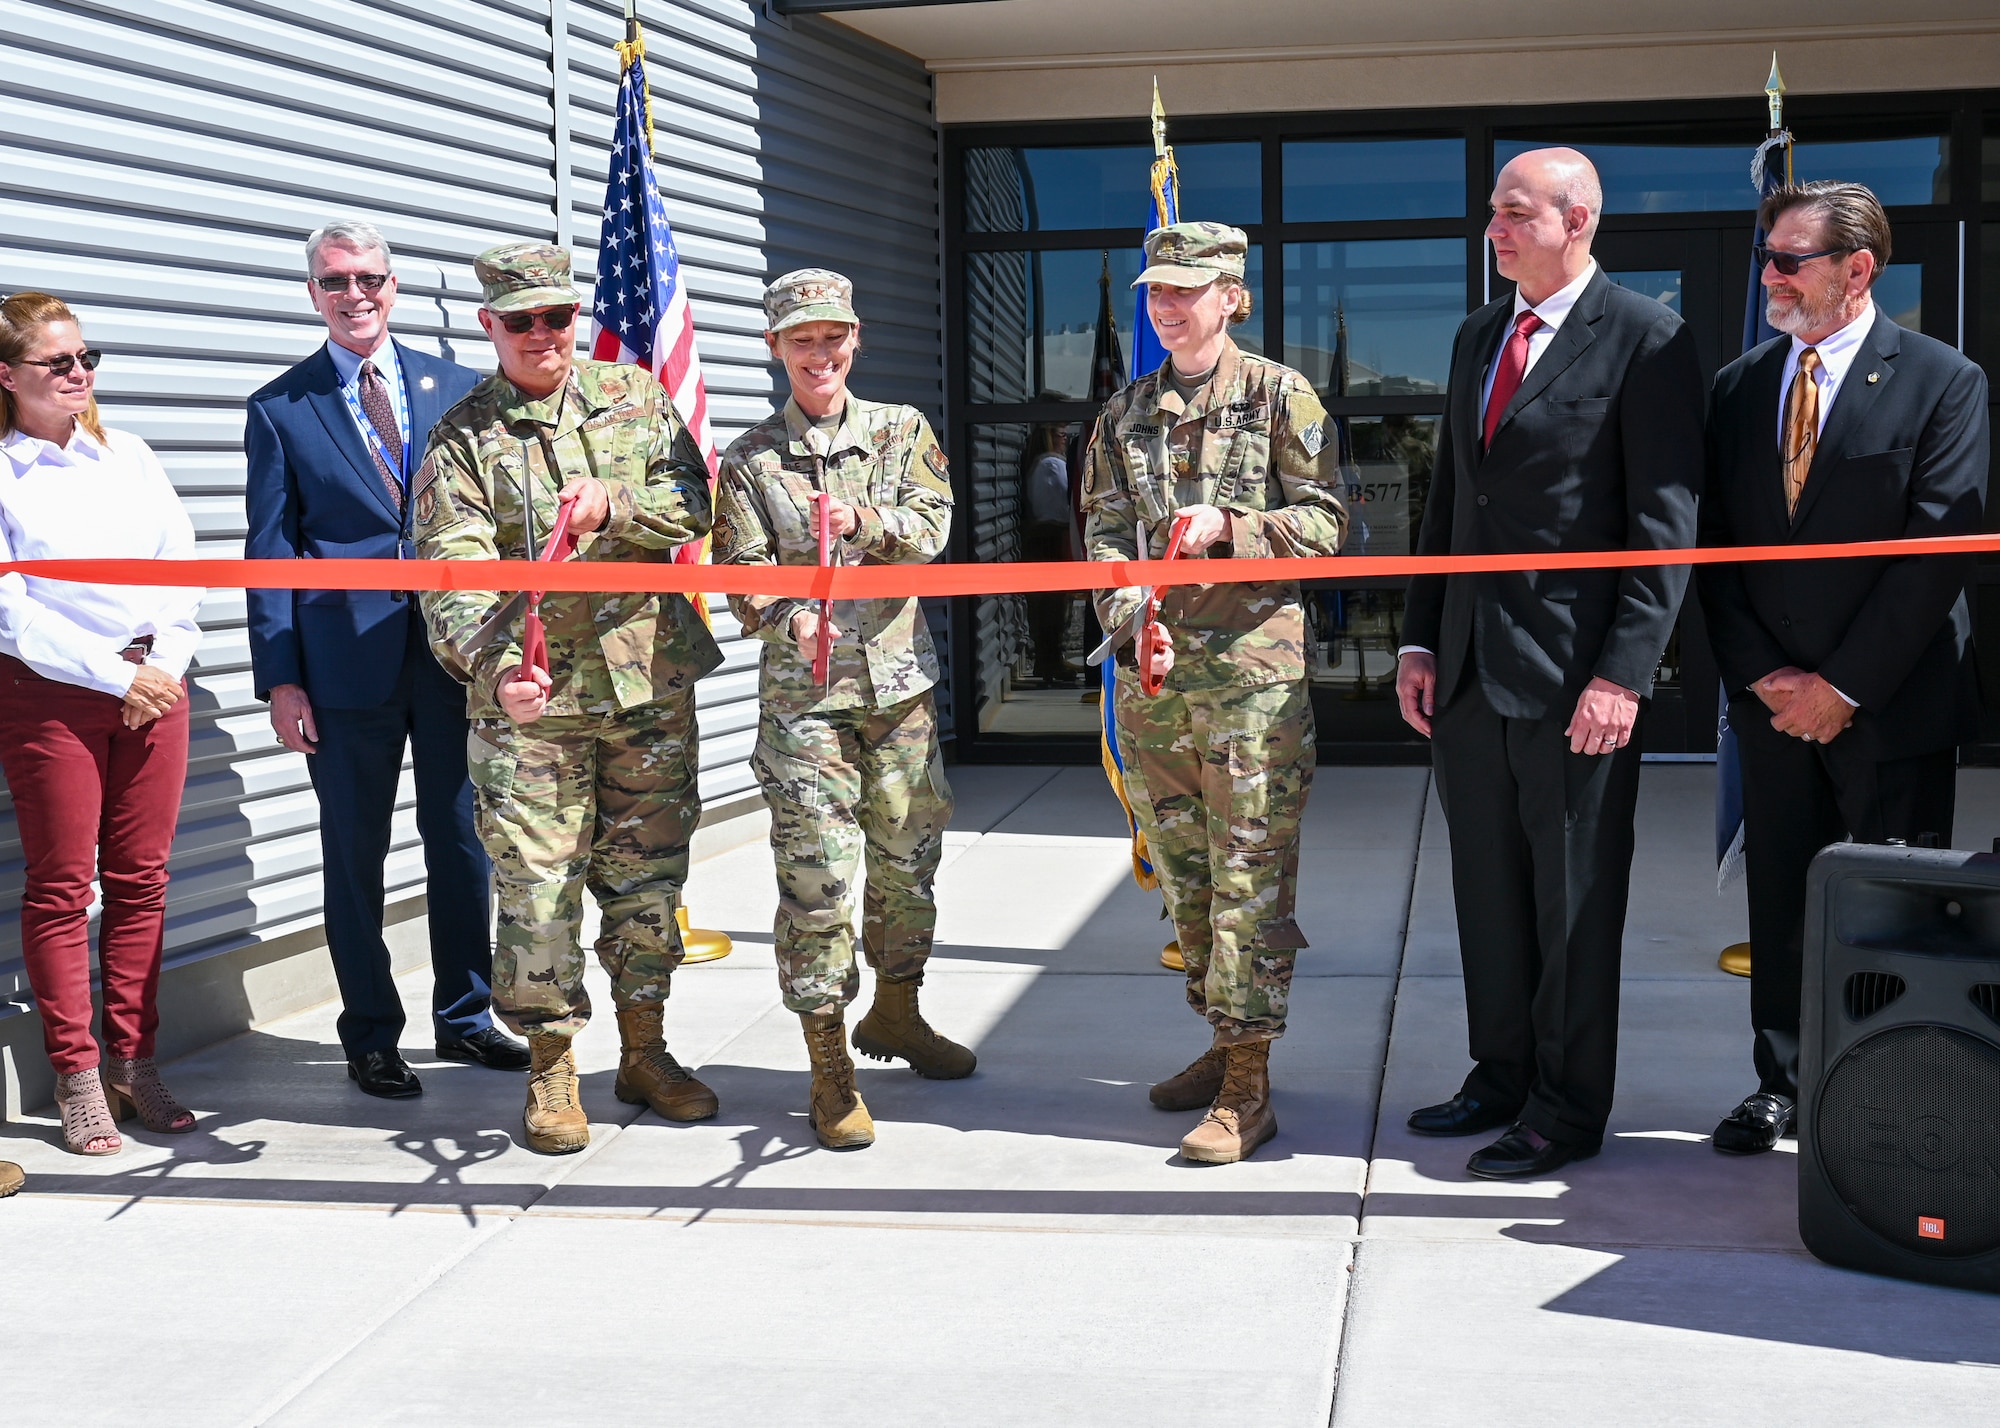 The Air Force Research Laboratory held a ribbon cutting ceremony celebrating the opening of the Space Warfighting Operations Research and Development laboratory May 20 at Kirtland AFB, N.M. Left to right: April Fitzner, U.S. Army Corps of Engineers; Mark Roverse, AFRL Spacecraft Technology Division chief; Col. Eric Felt, AFRL Space Vehicles director; Maj. Gen. Heather Pringle, AFRL commander; Maj. Katrina Johns, U.S. Army Corps of Engineers; Brian Engberg, AFRL Space Control Branch chief, and Bradley Rieck, AFRL senior facility engineer. (U.S. Air Force photo/Tech. Sgt. Jenna Bigham)